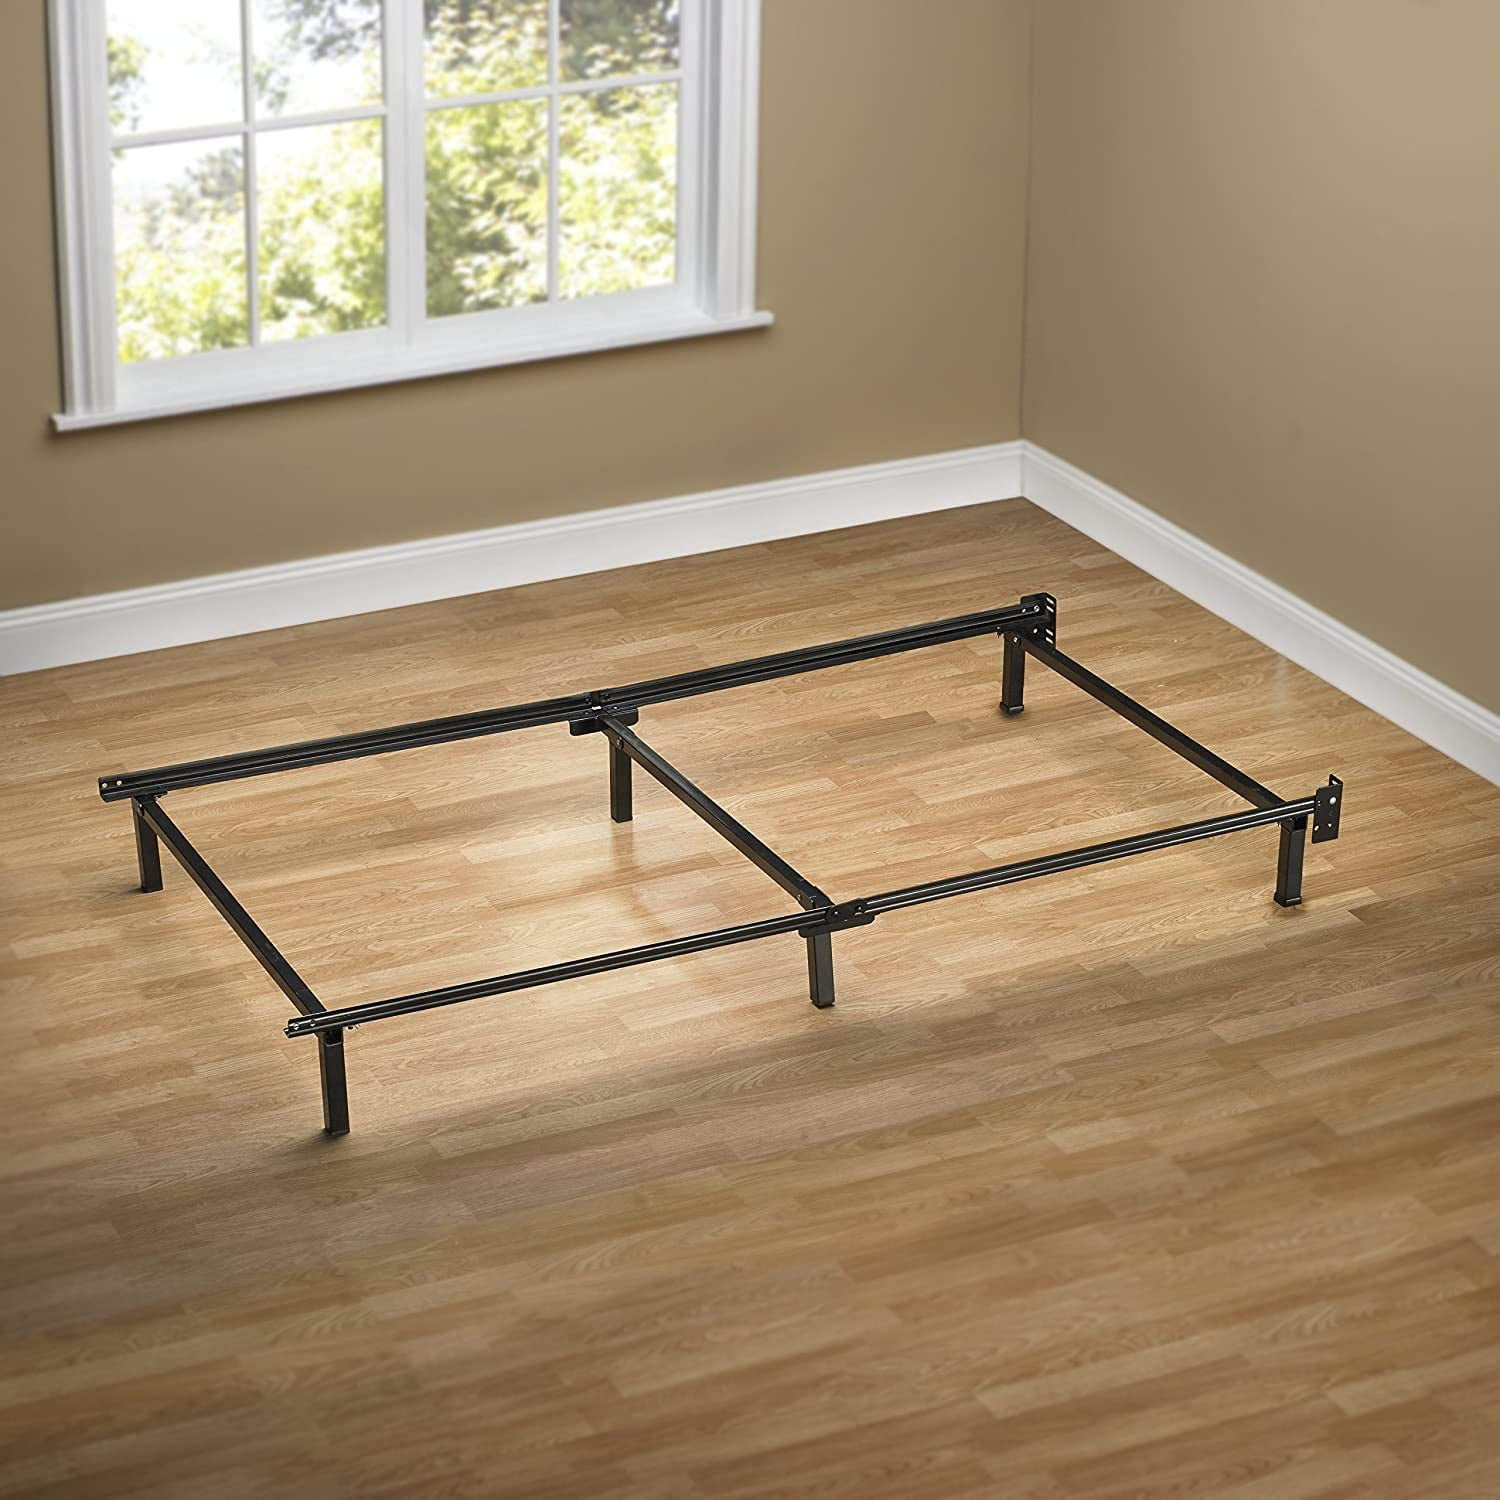 Zinus Compack Metal Bed Frame 7 Inch, How To Put A Zinus Bed Frame Together